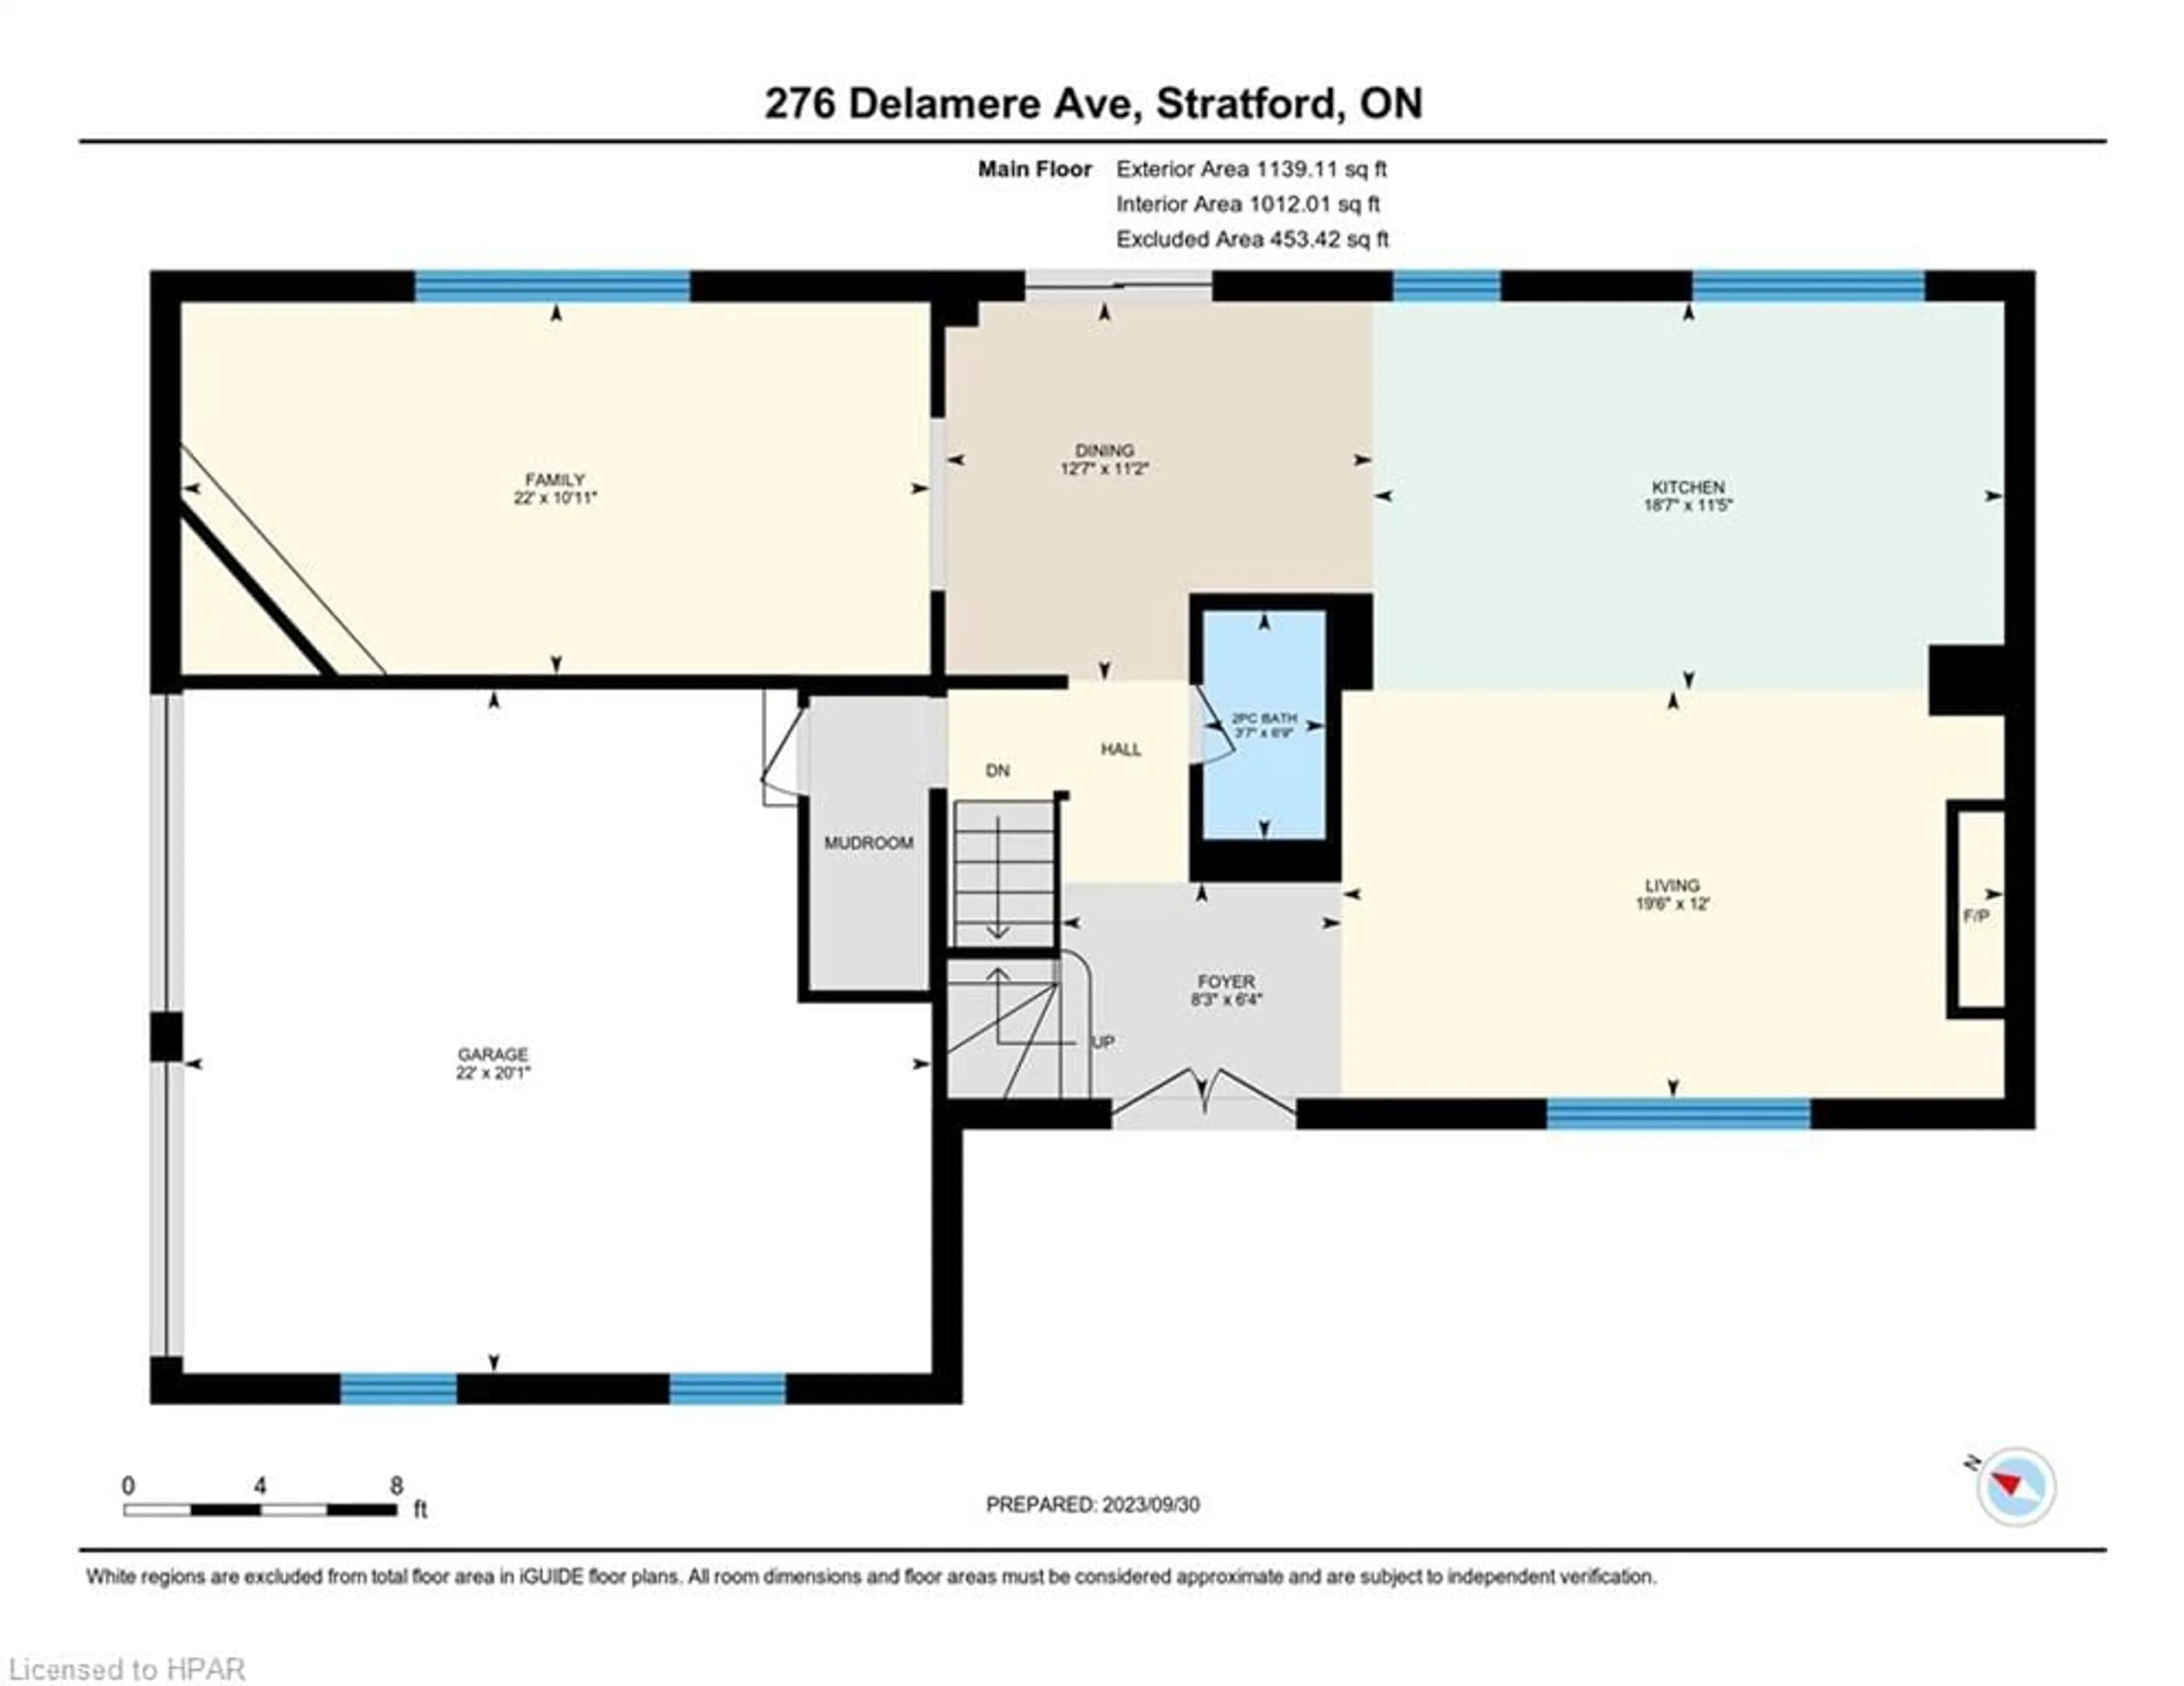 Floor plan for 276 Delamere Ave, Stratford Ontario N5A 5A2